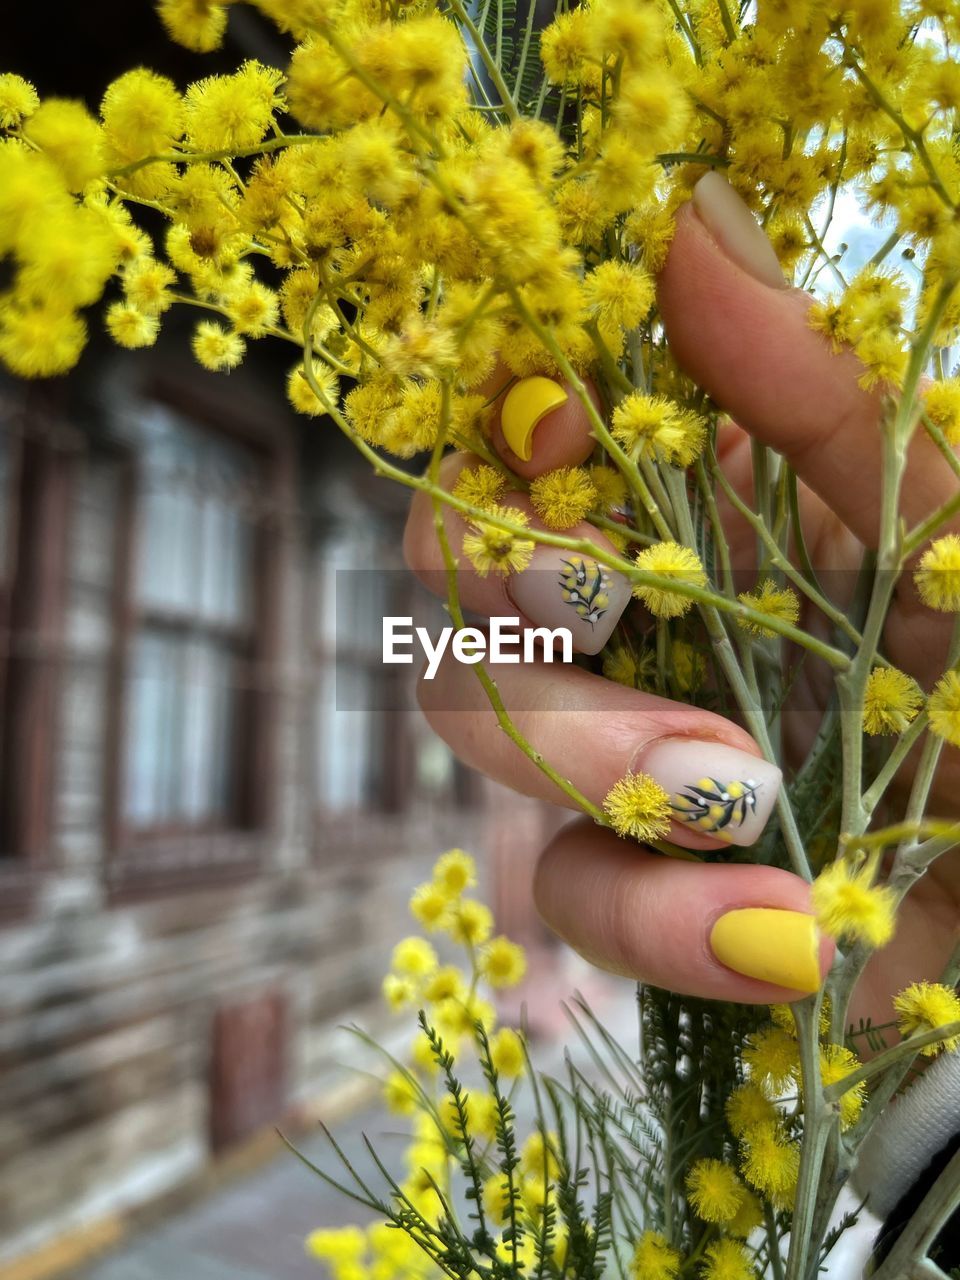 yellow, plant, one person, flower, flowering plant, hand, nature, adult, spring, women, holding, freshness, floristry, day, outdoors, beauty in nature, floral design, lifestyles, growth, close-up, focus on foreground, bouquet, architecture, fragility, tree, leisure activity, branch